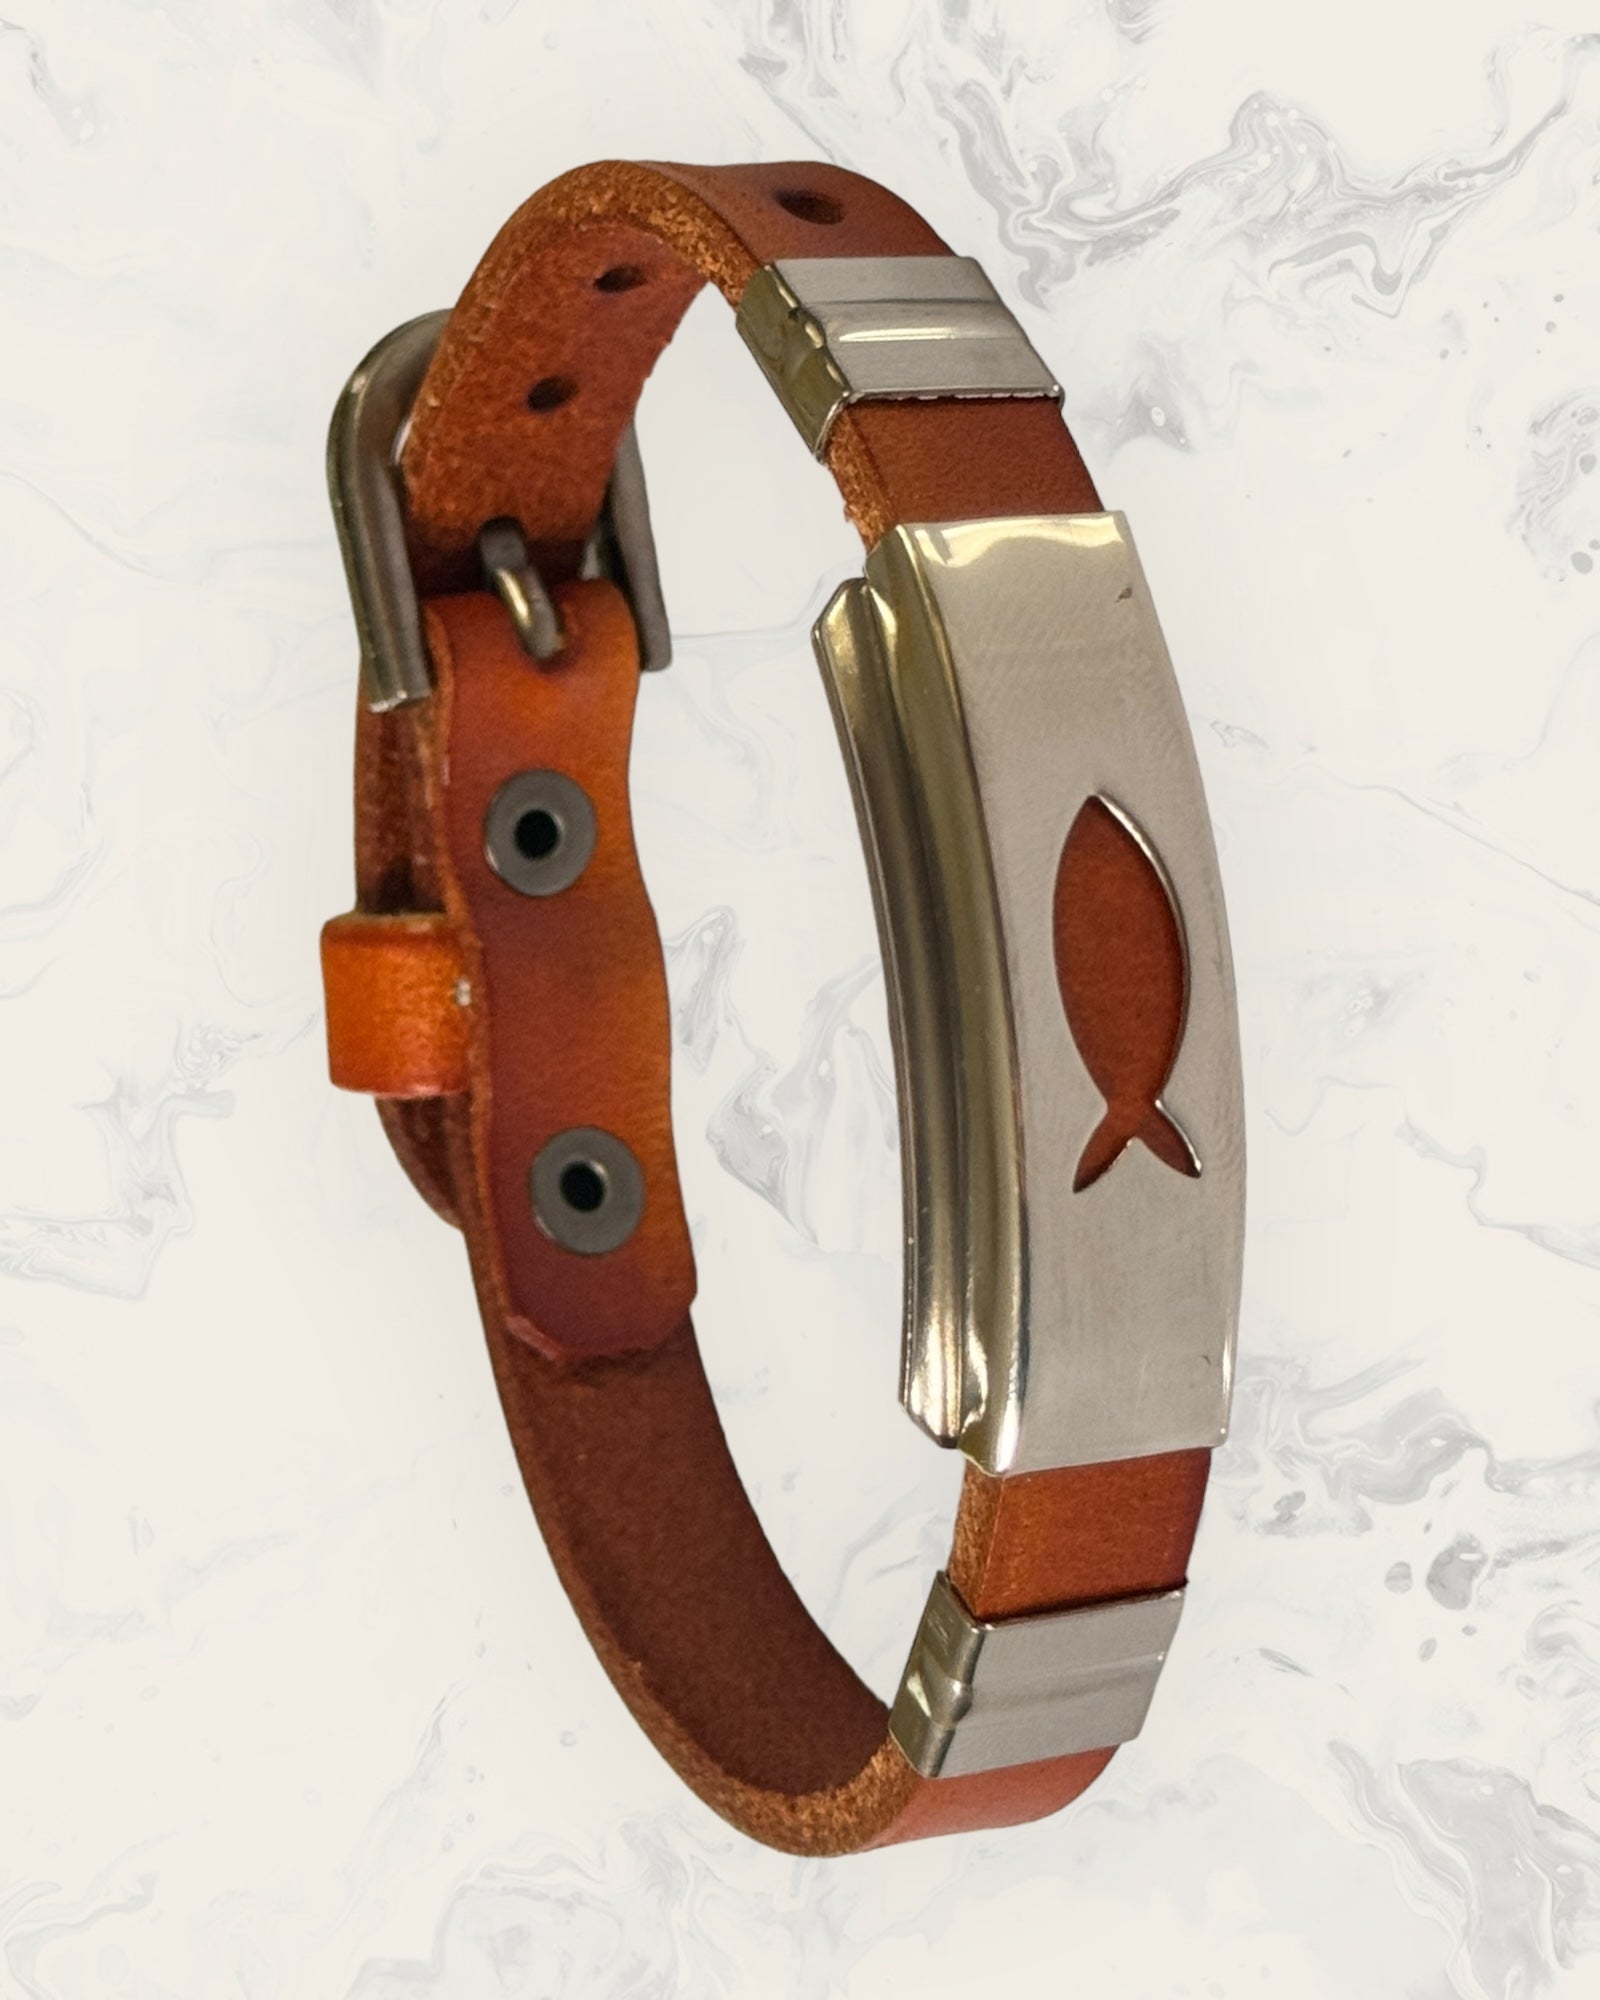 Natural Pain Relief and EMF Protection Bracelet Leather Band Color Burnt Orange with Christian Fish design on a silver metal slider